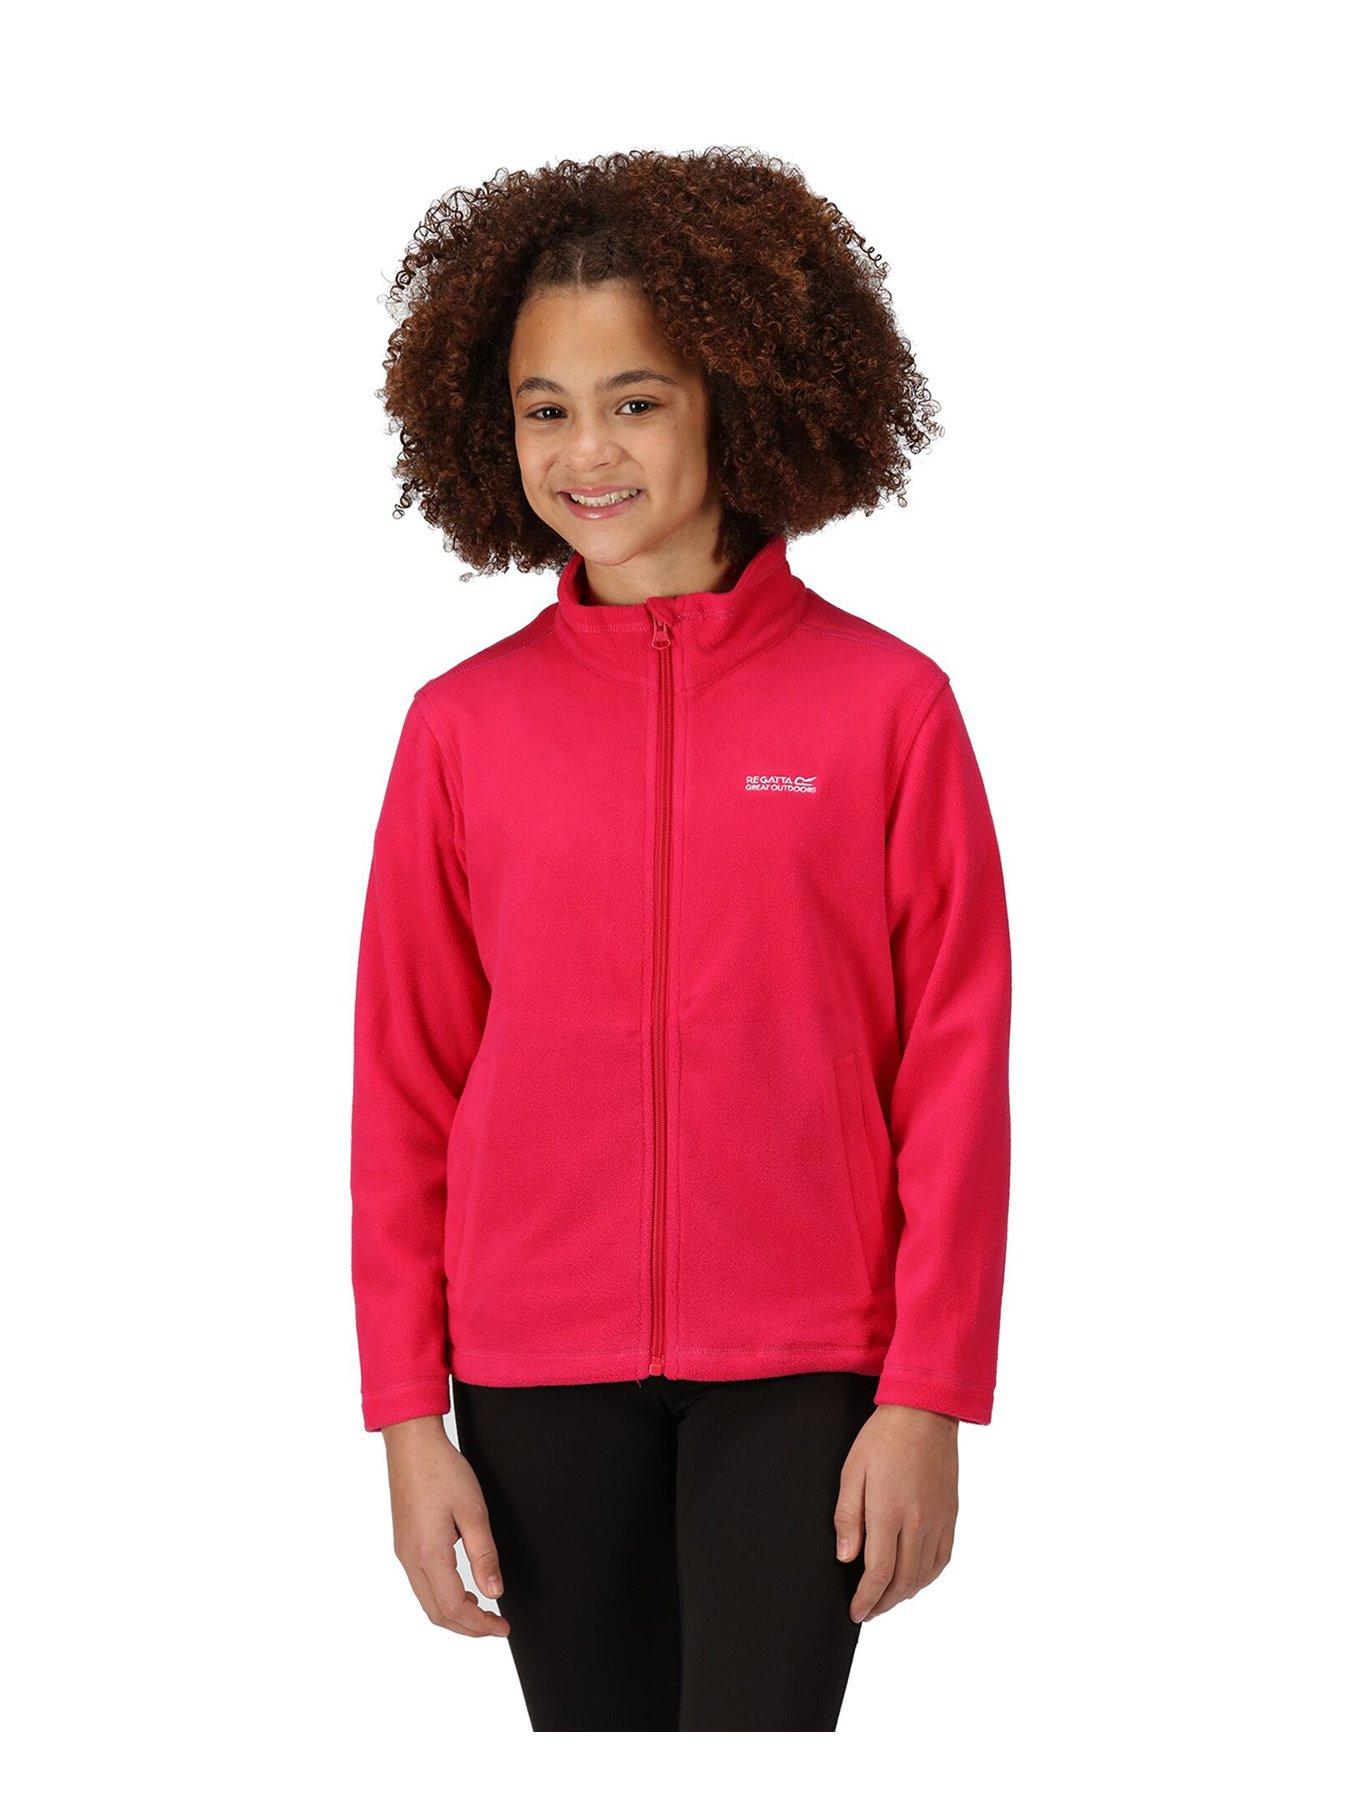 years jackets | & leisure & sports | Coats | 11/12 & clothing Sports baby Kids